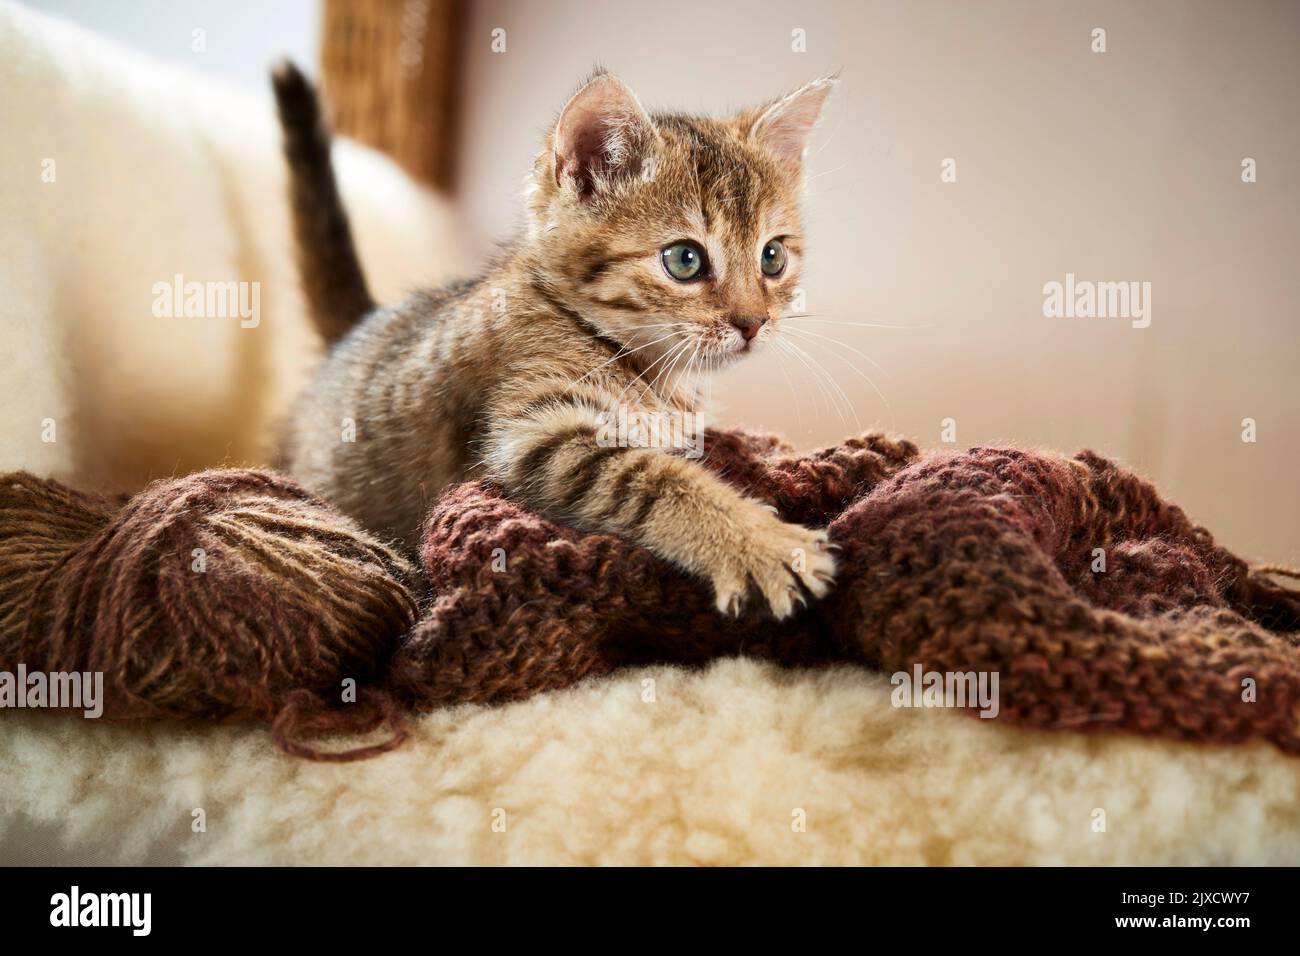 Domestic cat. A tabby kitten on a wicker chair with knitting utensils. Germany Stock Photo